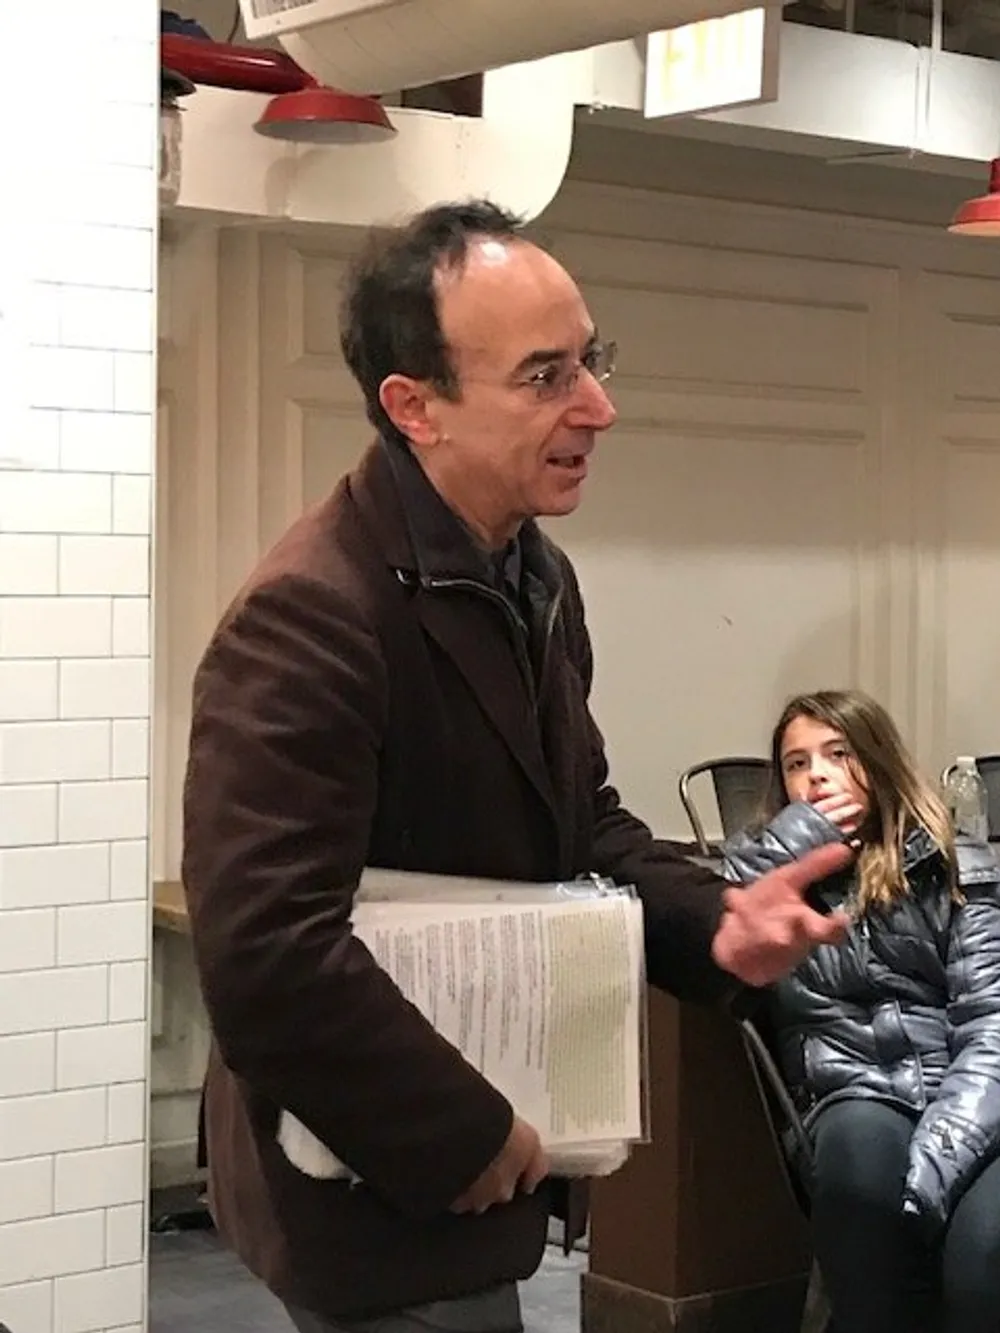 A man in a brown jacket is speaking and gesturing with his right hand while holding papers with a young girl seated in the background